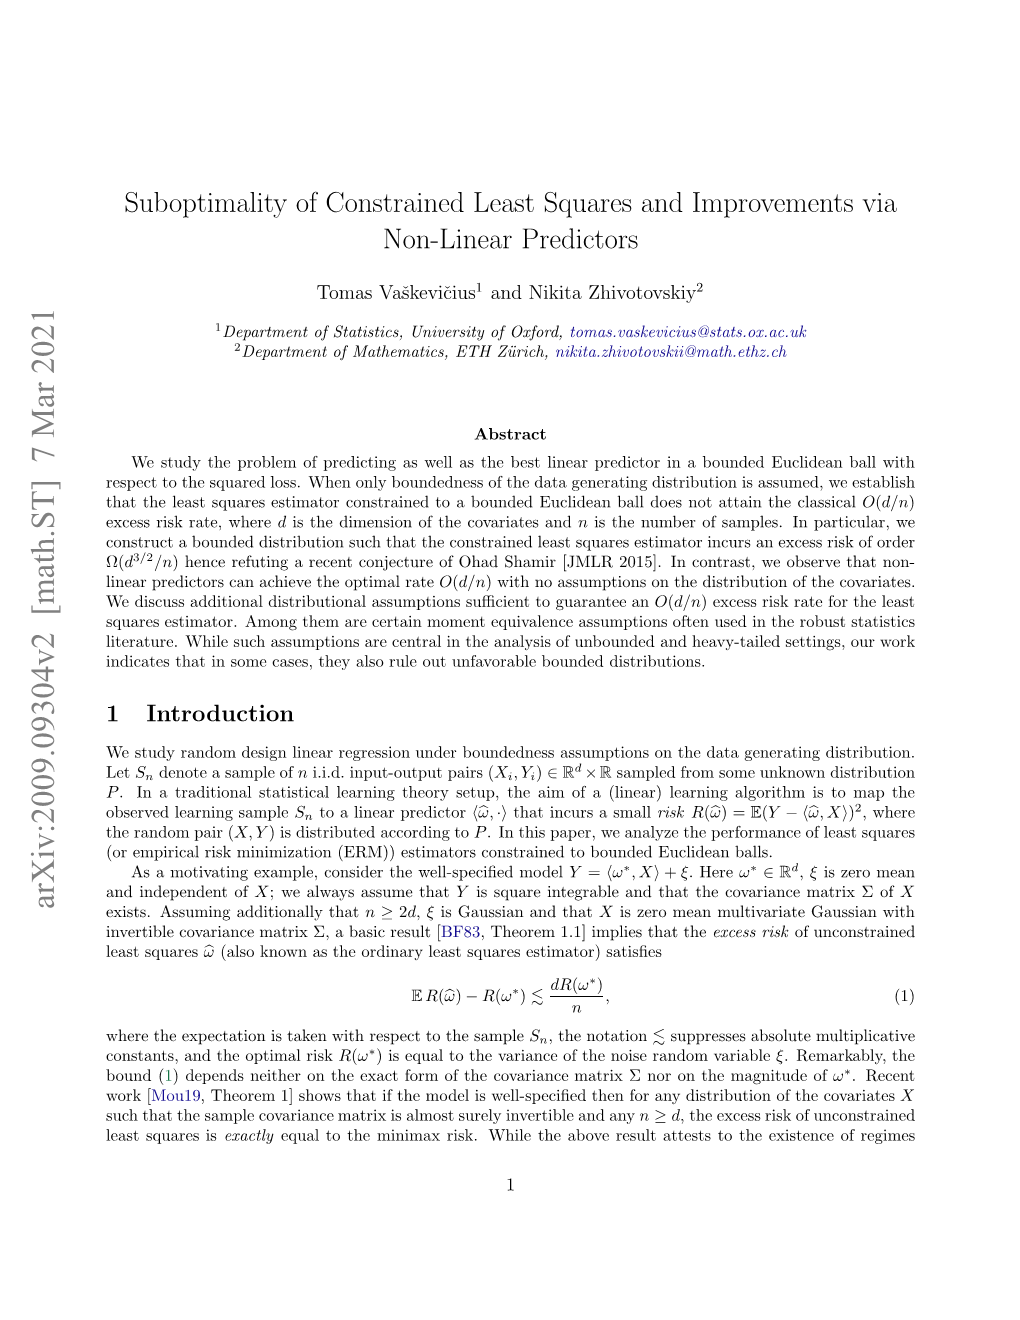 Suboptimality of Constrained Least Squares and Improvements Via Non